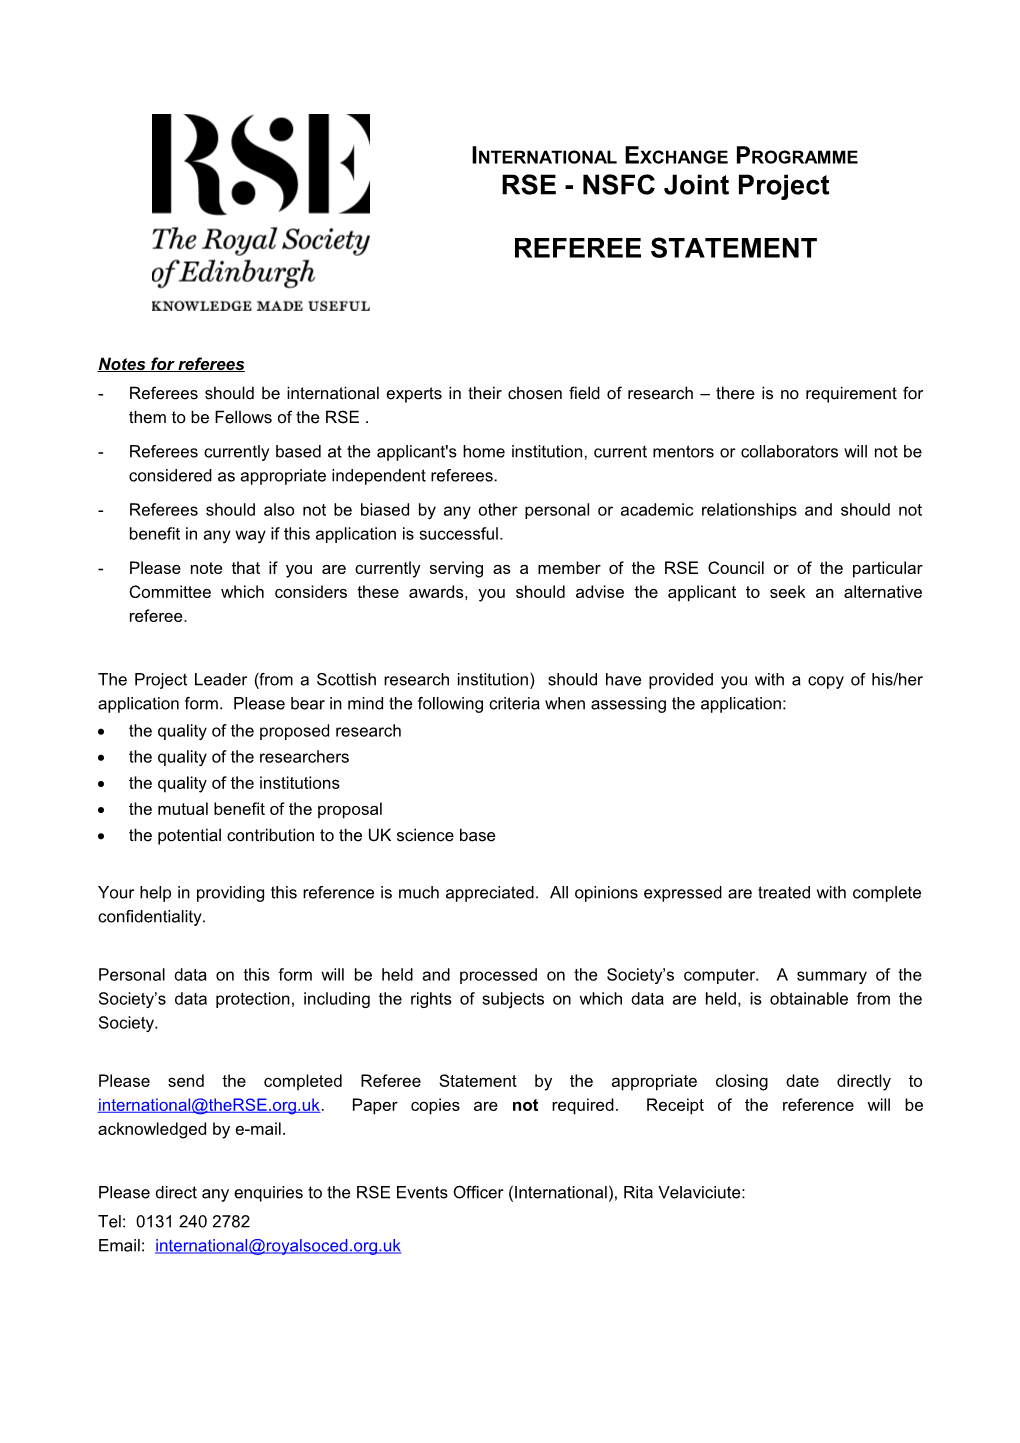 Referee Statement for a Short Term Visit Tenable Overseas